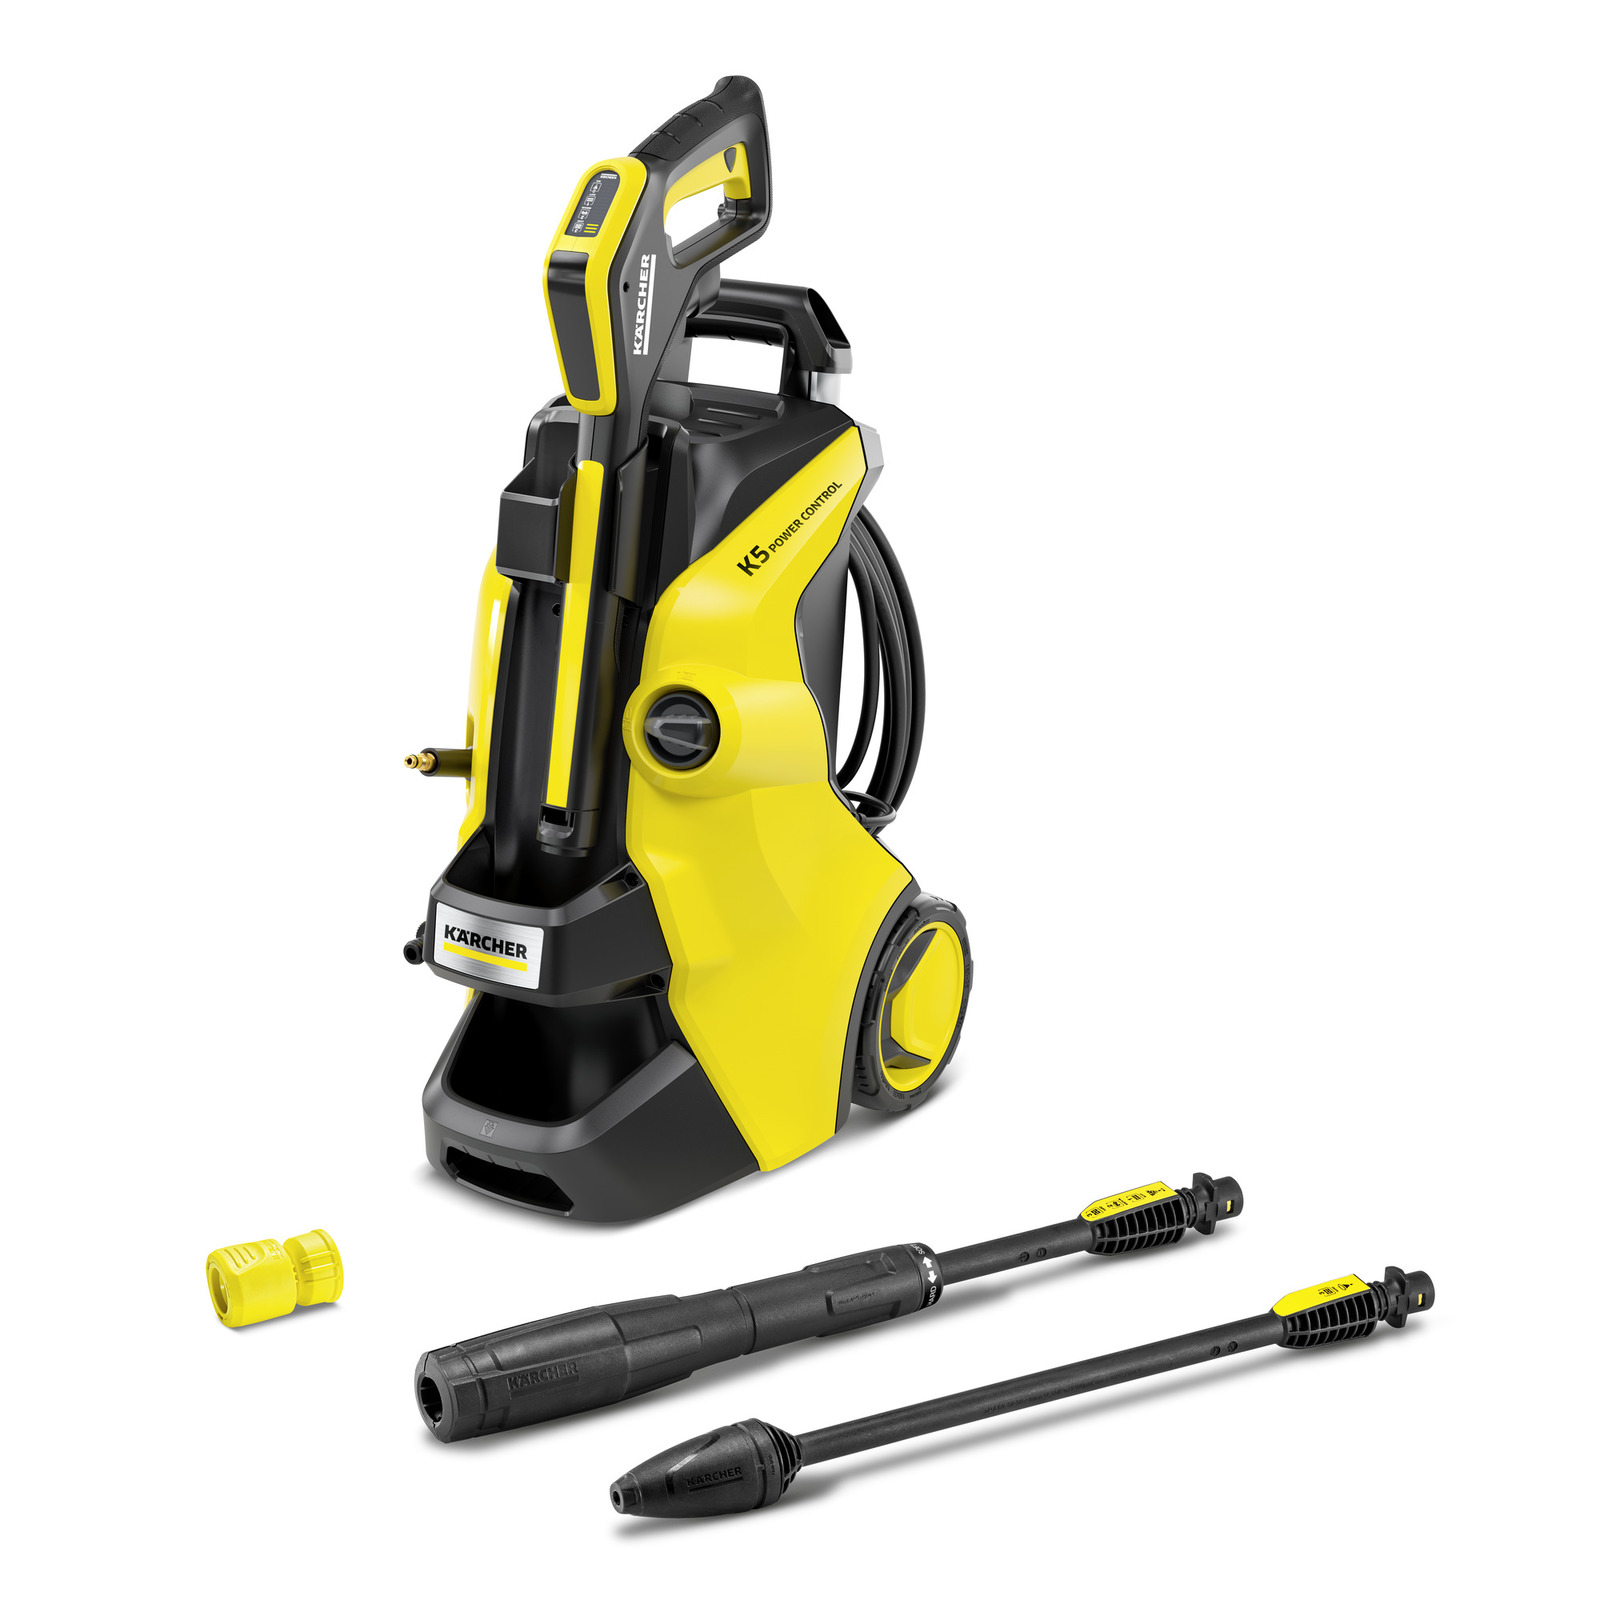 Karcher Electric Pressure Washers Variable Lance Spray Nozzle Car Cleaning 